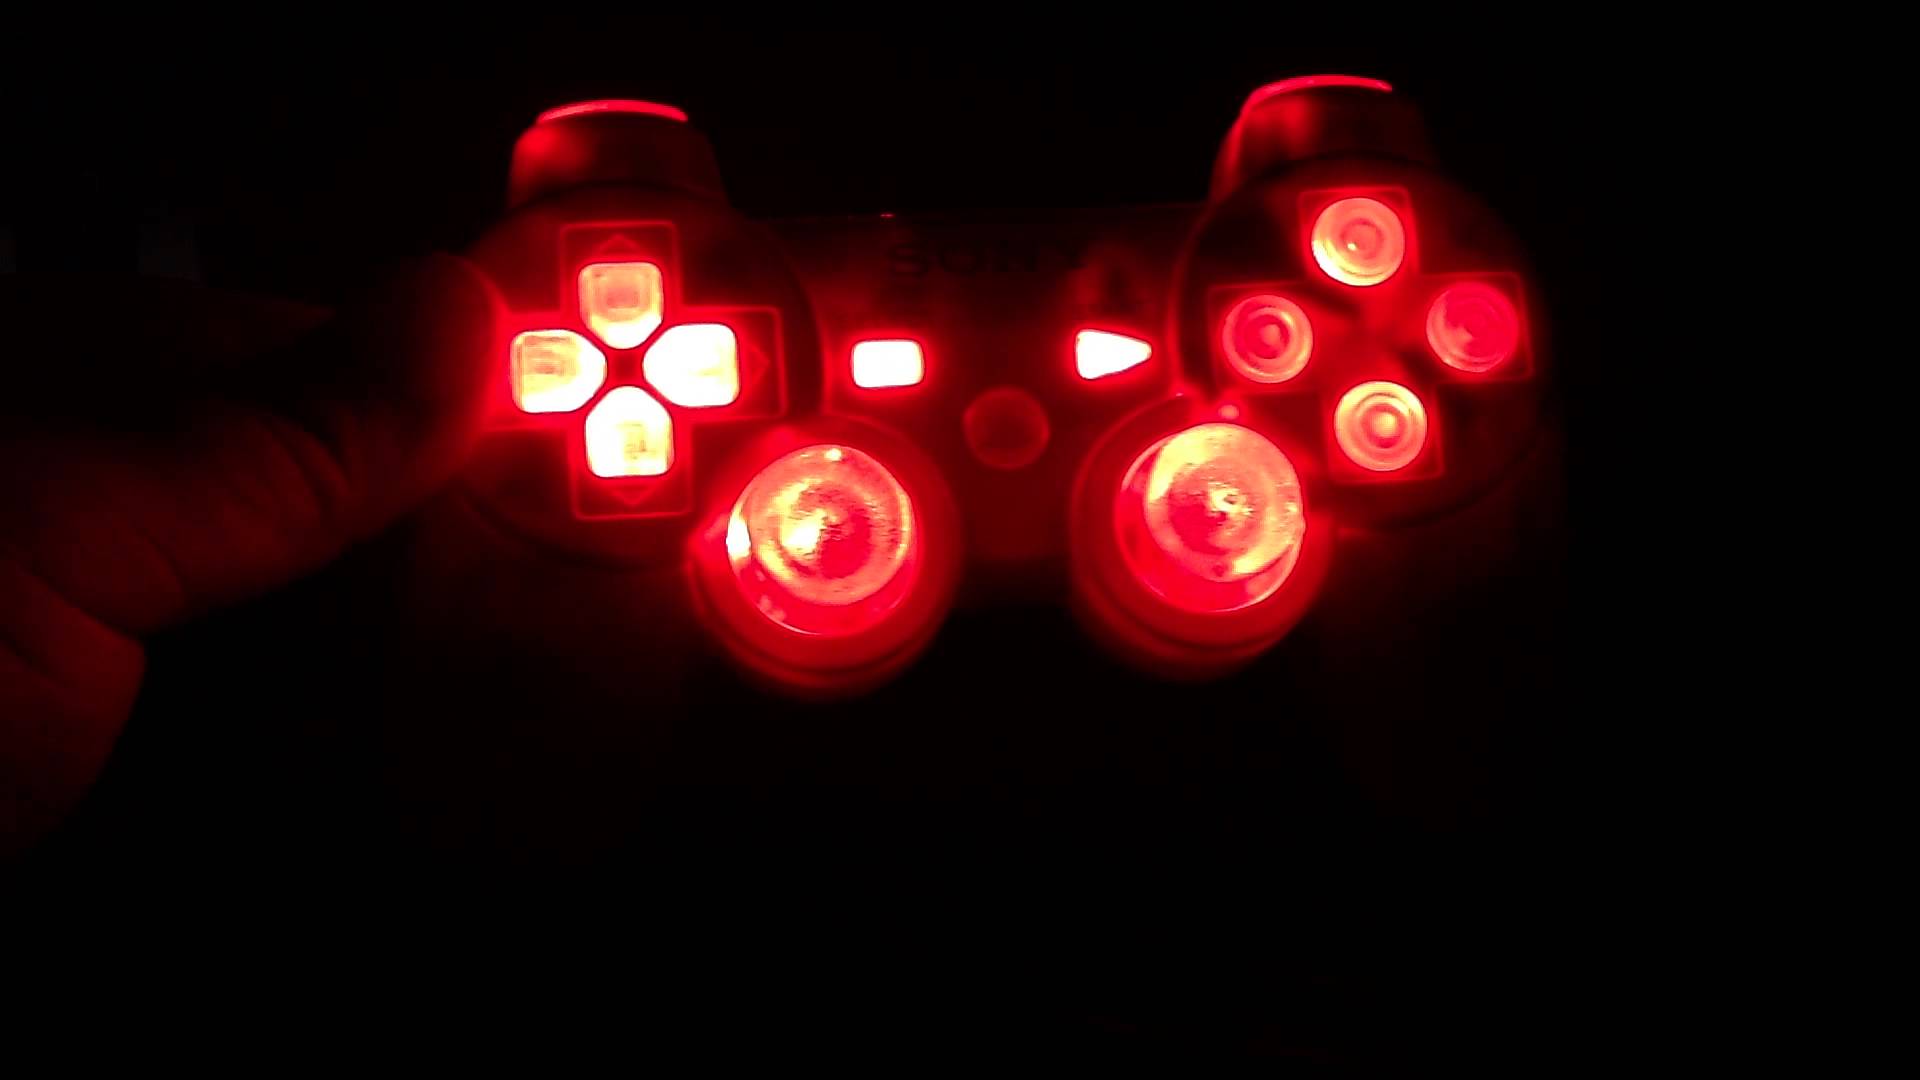 LED Modded Playstation 3 Controller With RED Lights On ALL Buttons